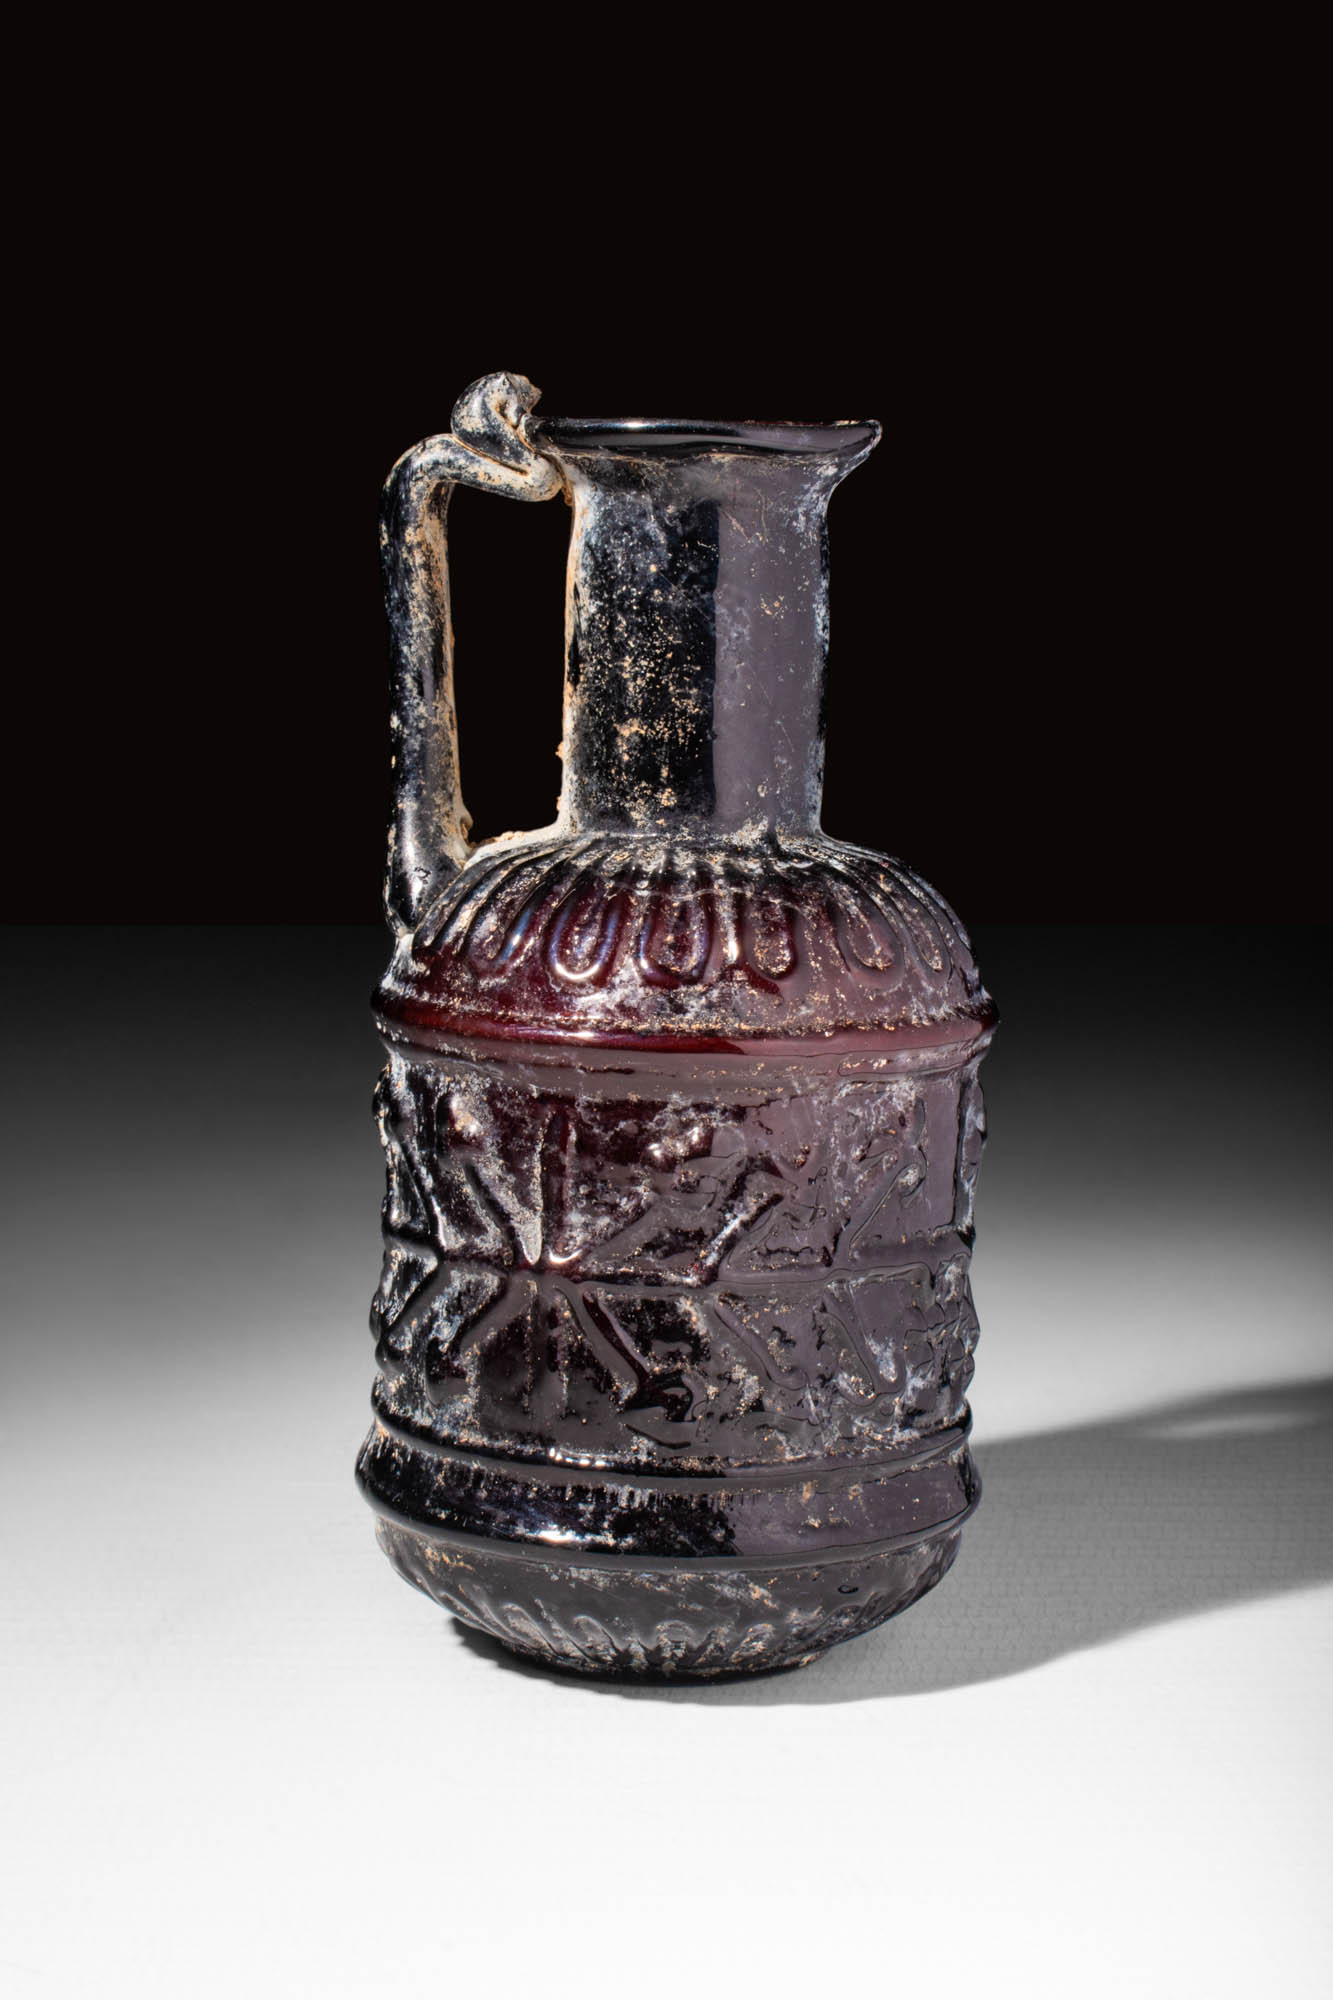 LATE ROMAN PURPLE GLASS BOTTLE DECORATED WITH MOULDED GEOMETRIC MOTIF - Image 2 of 5